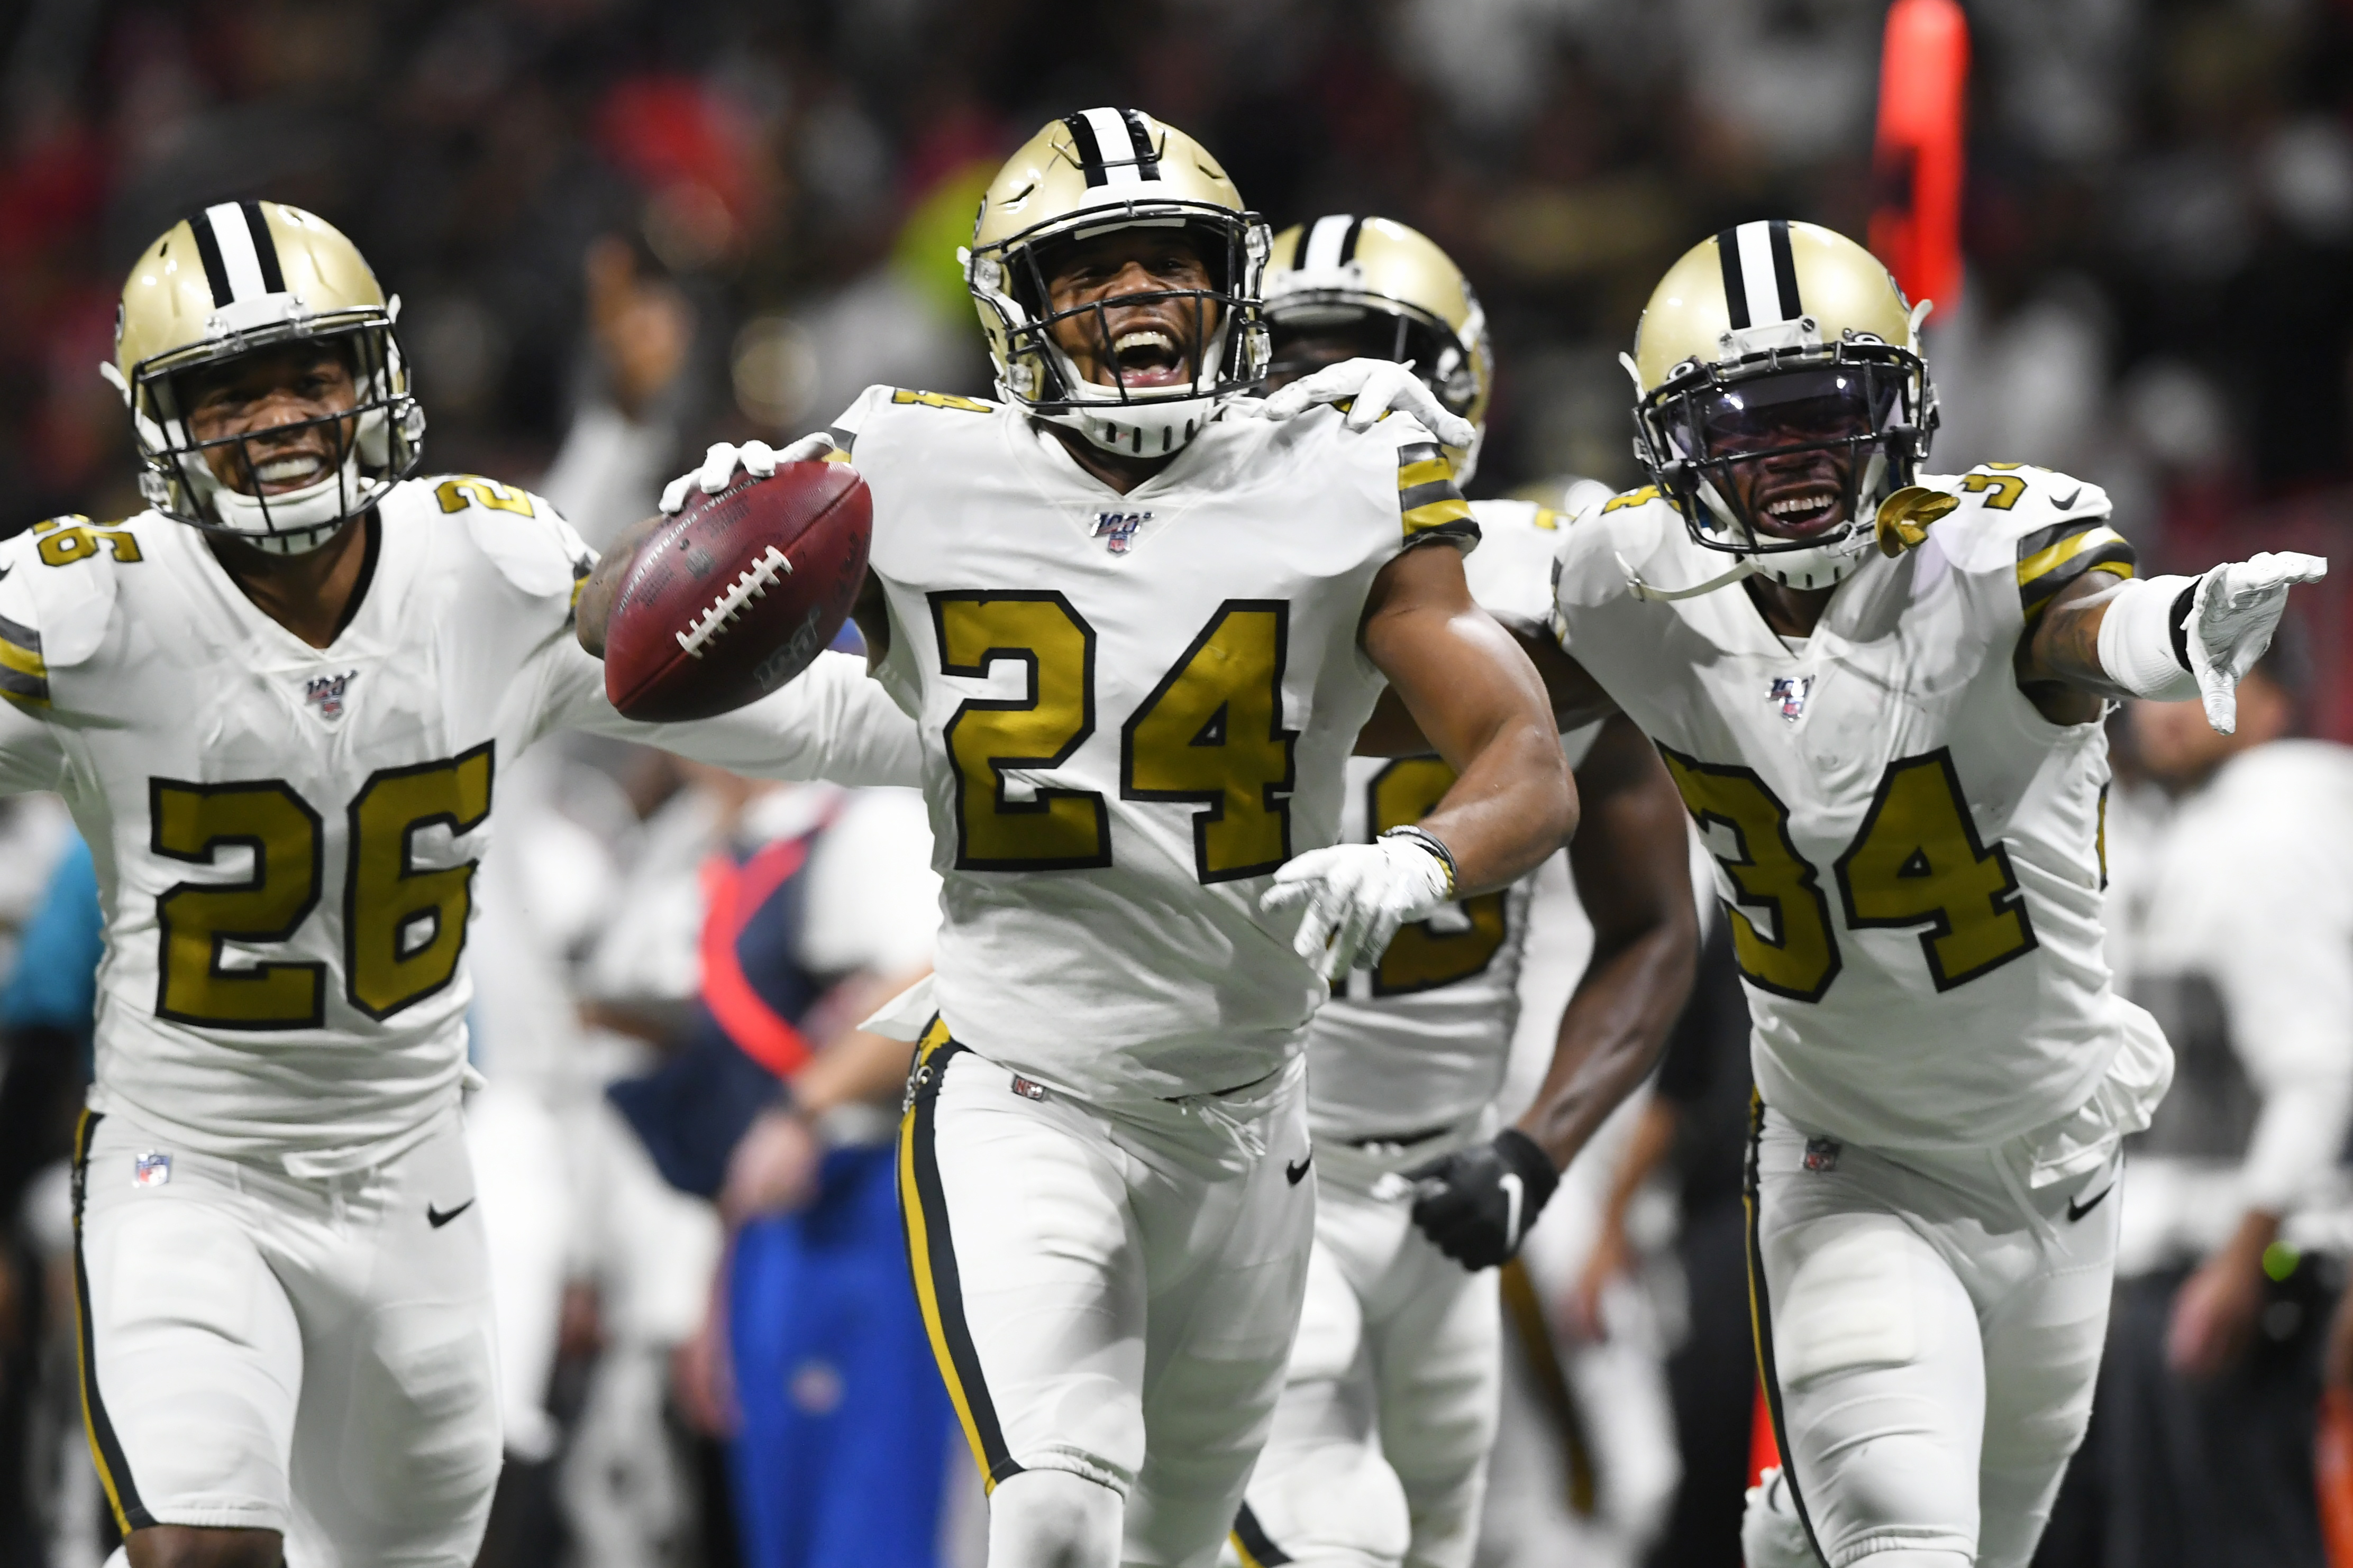 Saints showcased depth, dynamism in clinching NFC South